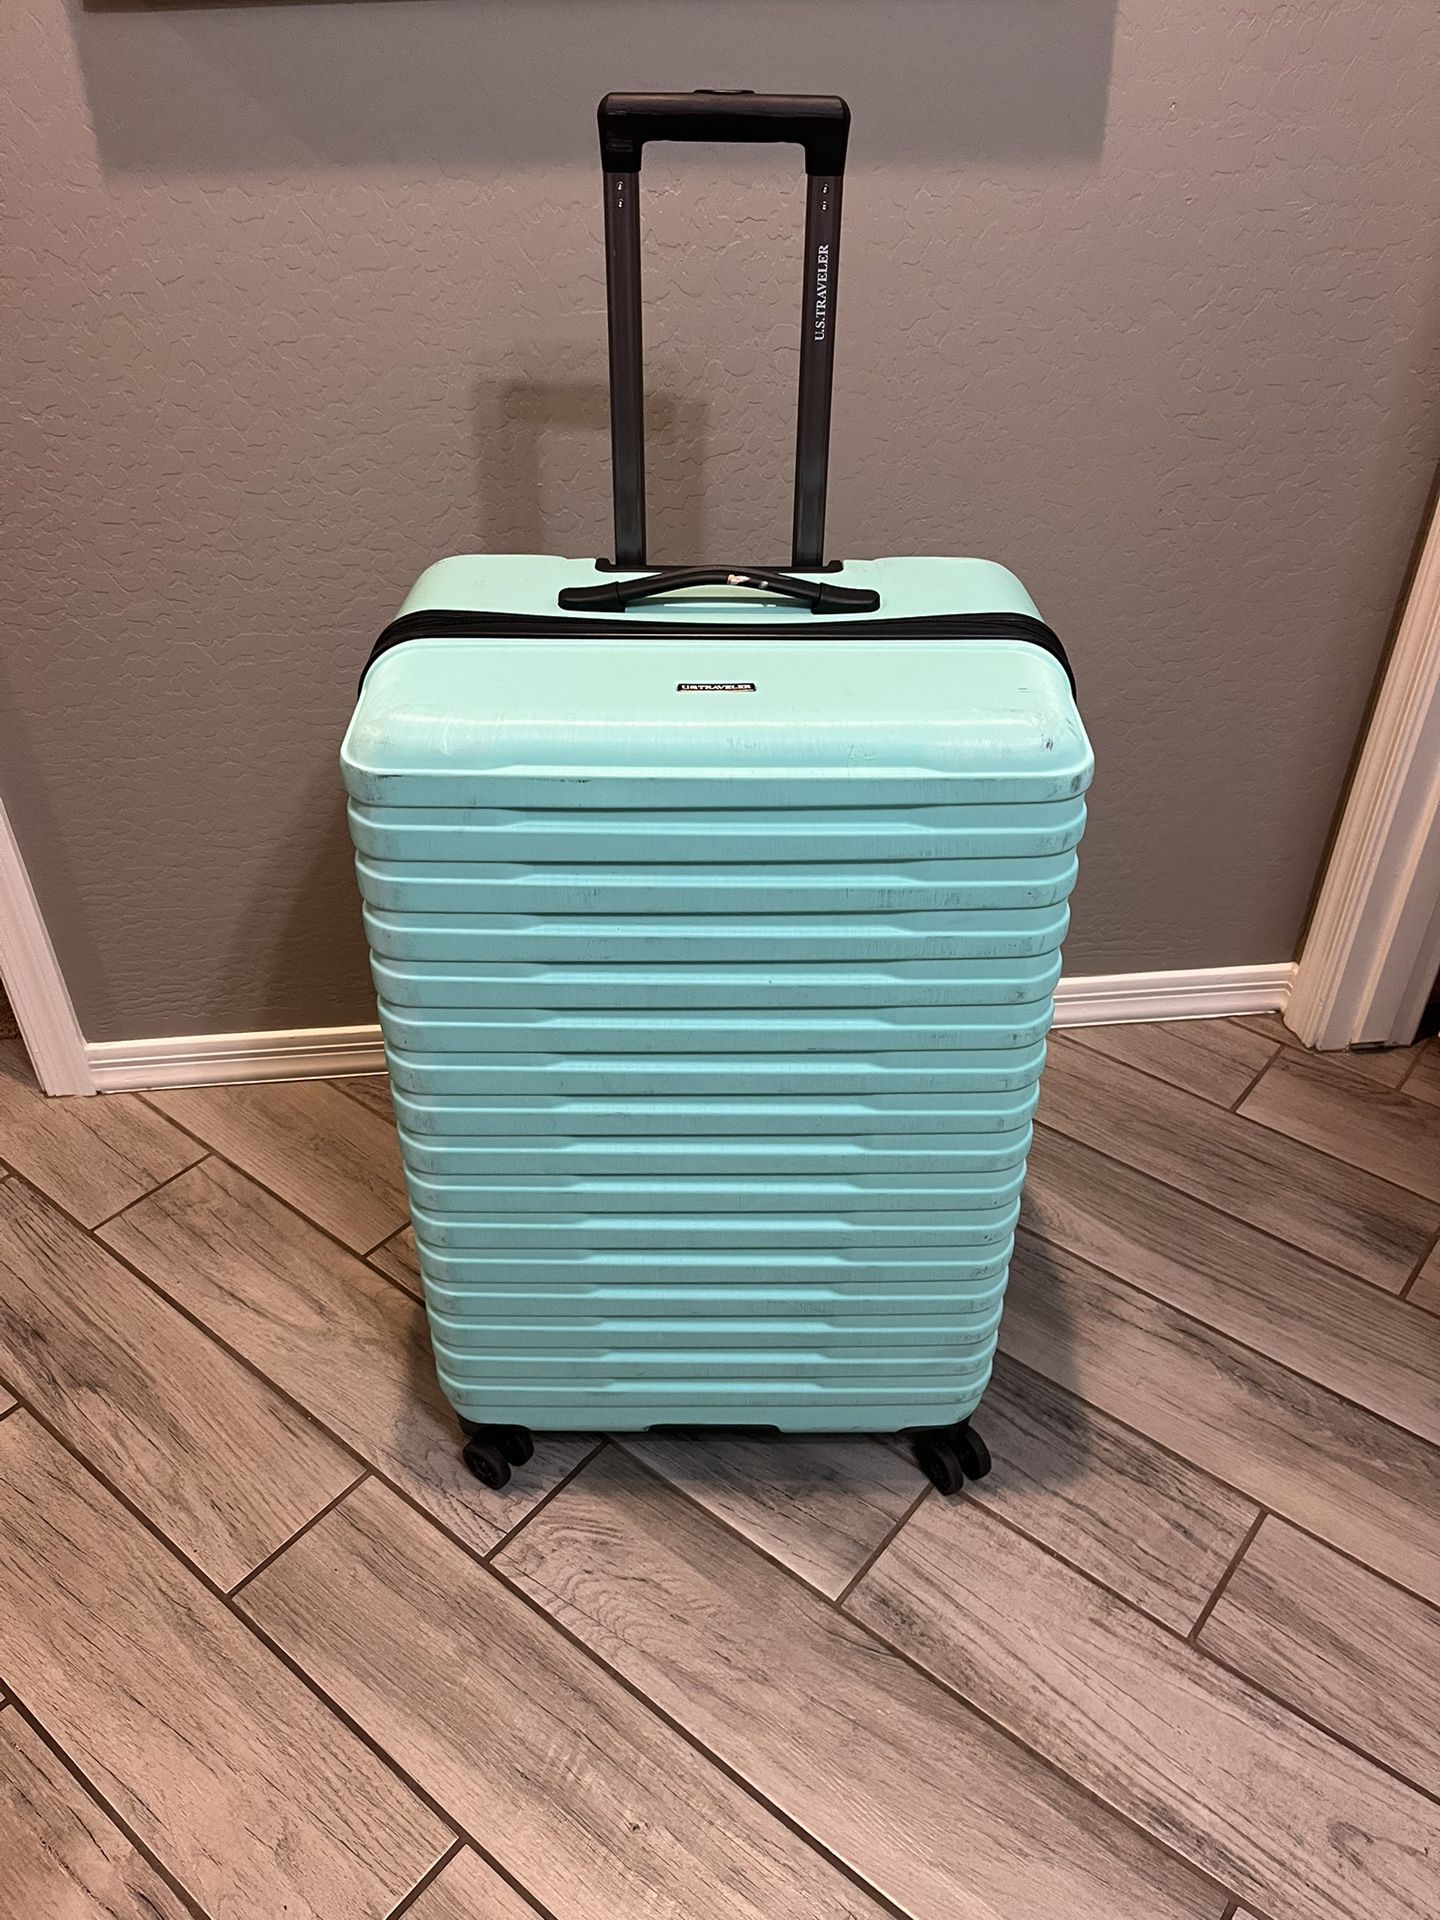 Travel, Suitcase, Large With 4 Wheels $15